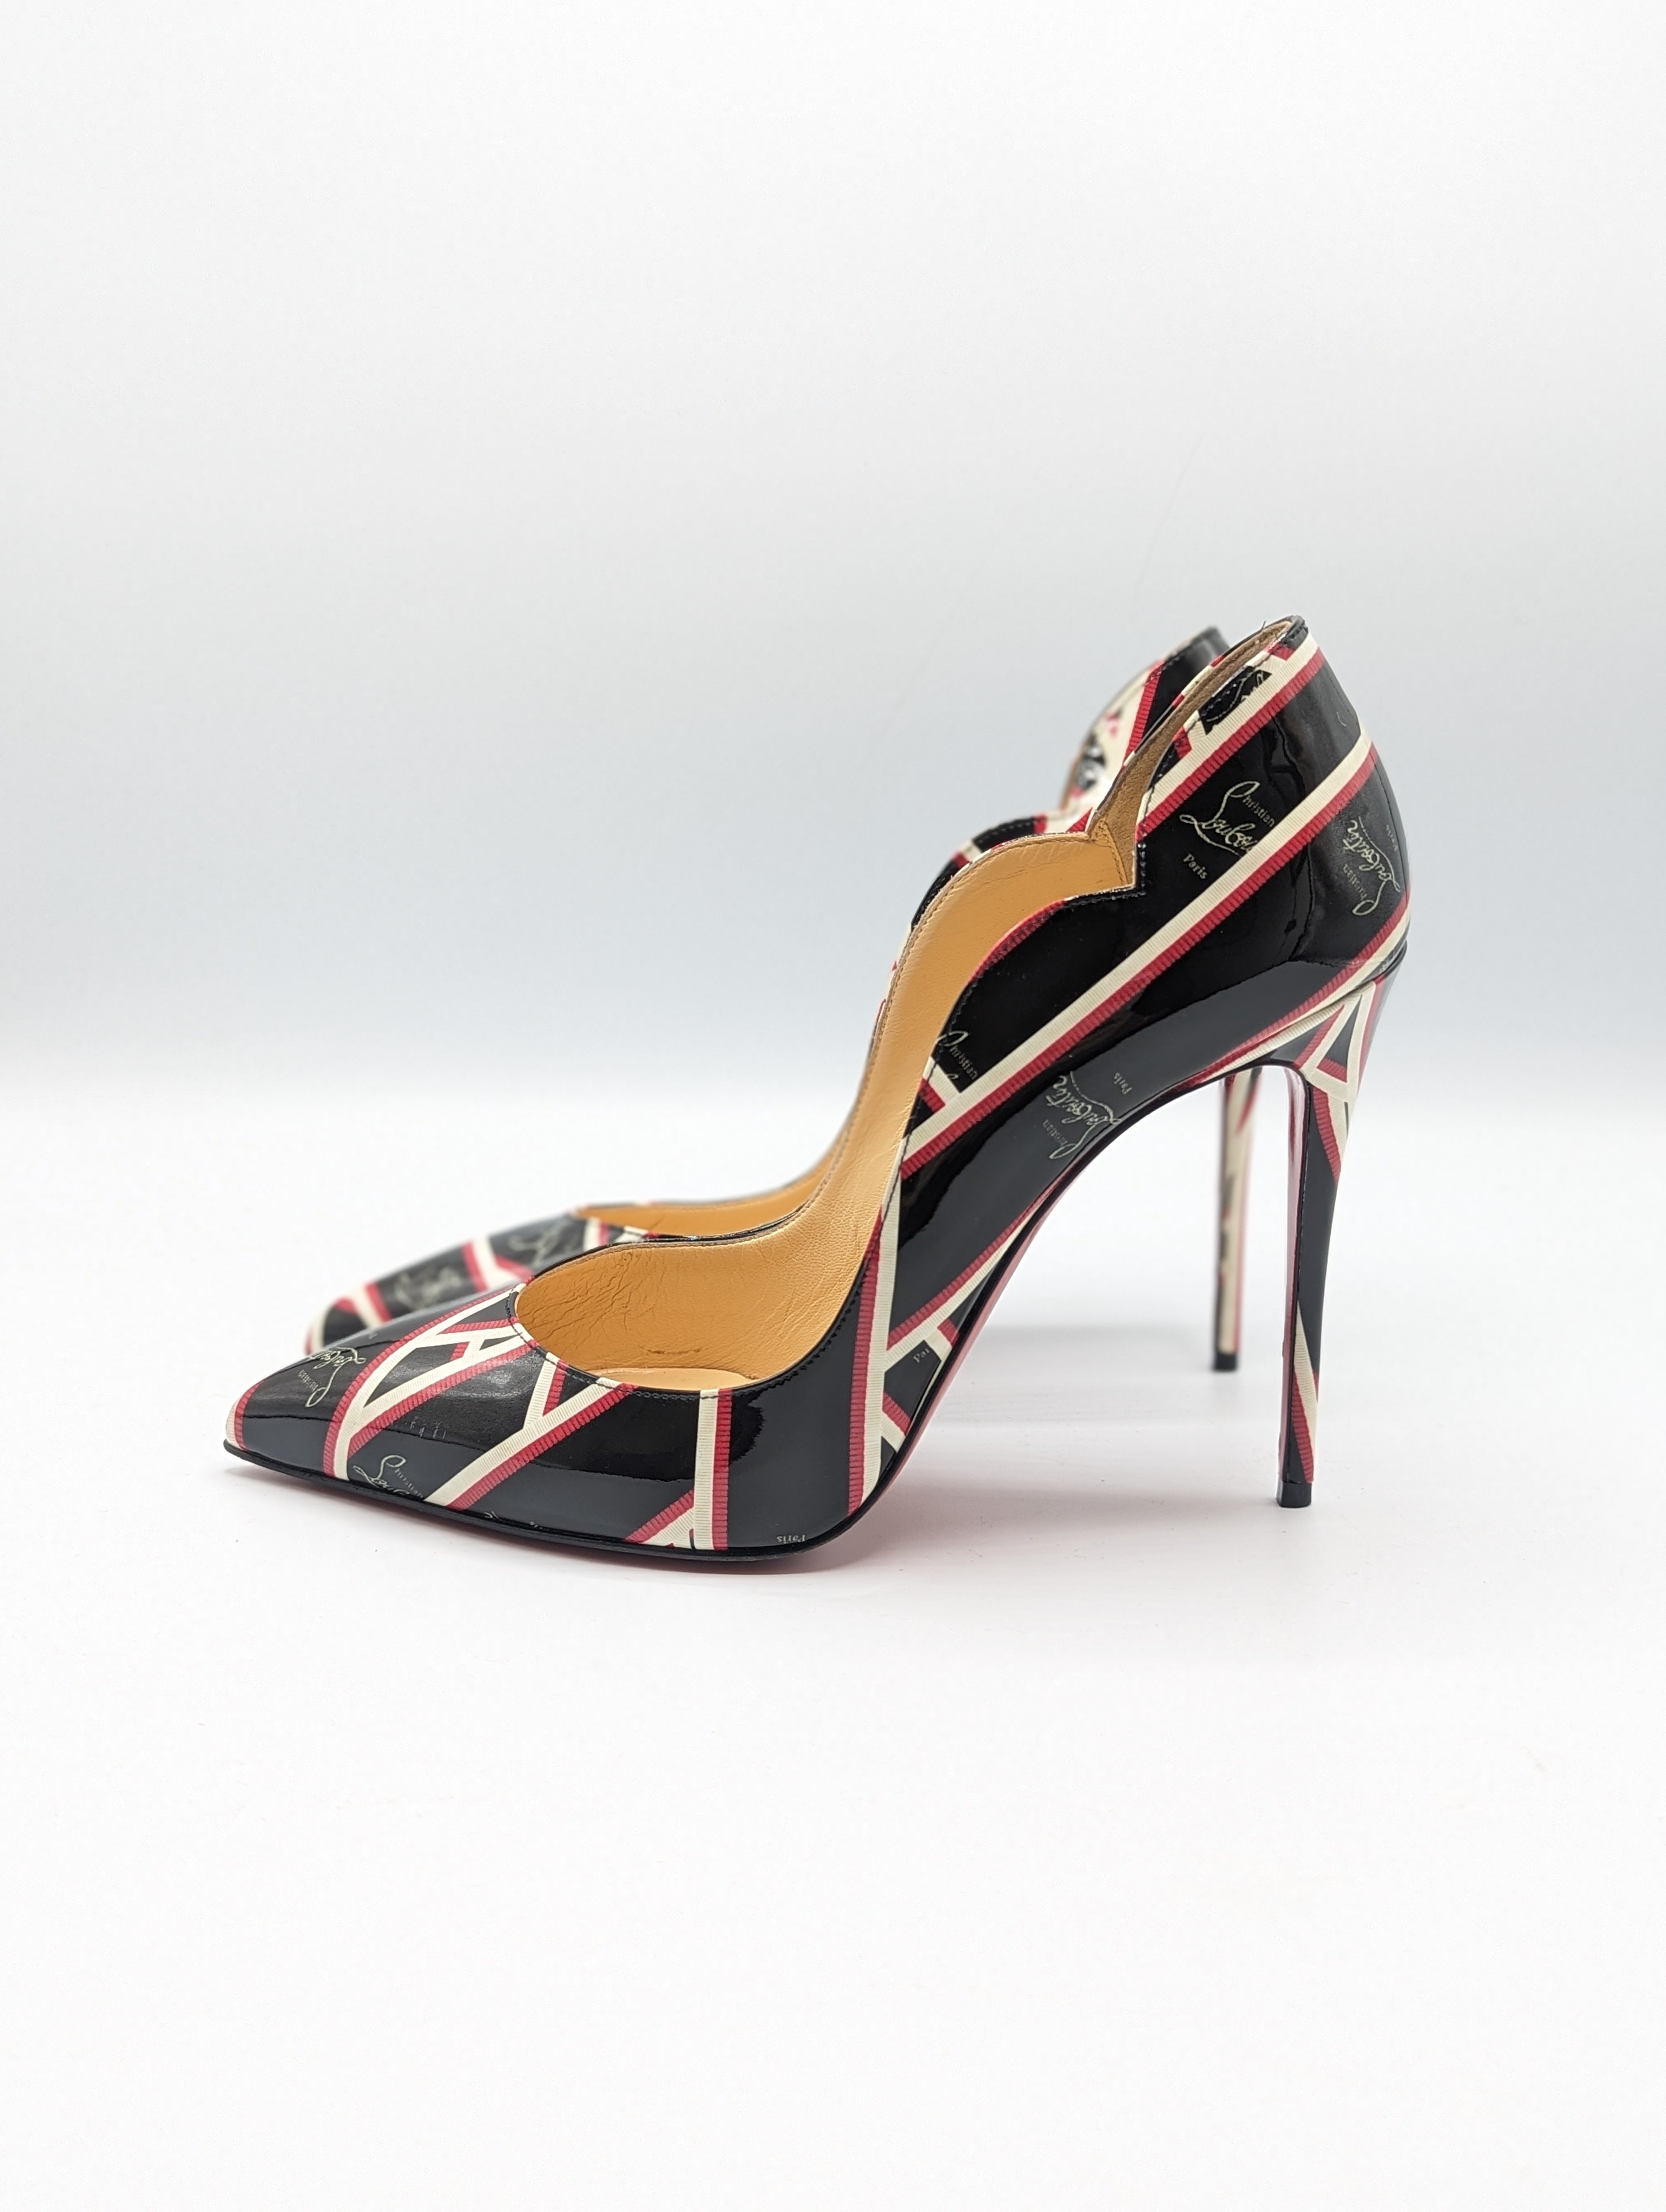 Christian Louboutin Hot Chick Patent Ribbon Pumps Size 39 – For The Love of  Luxury